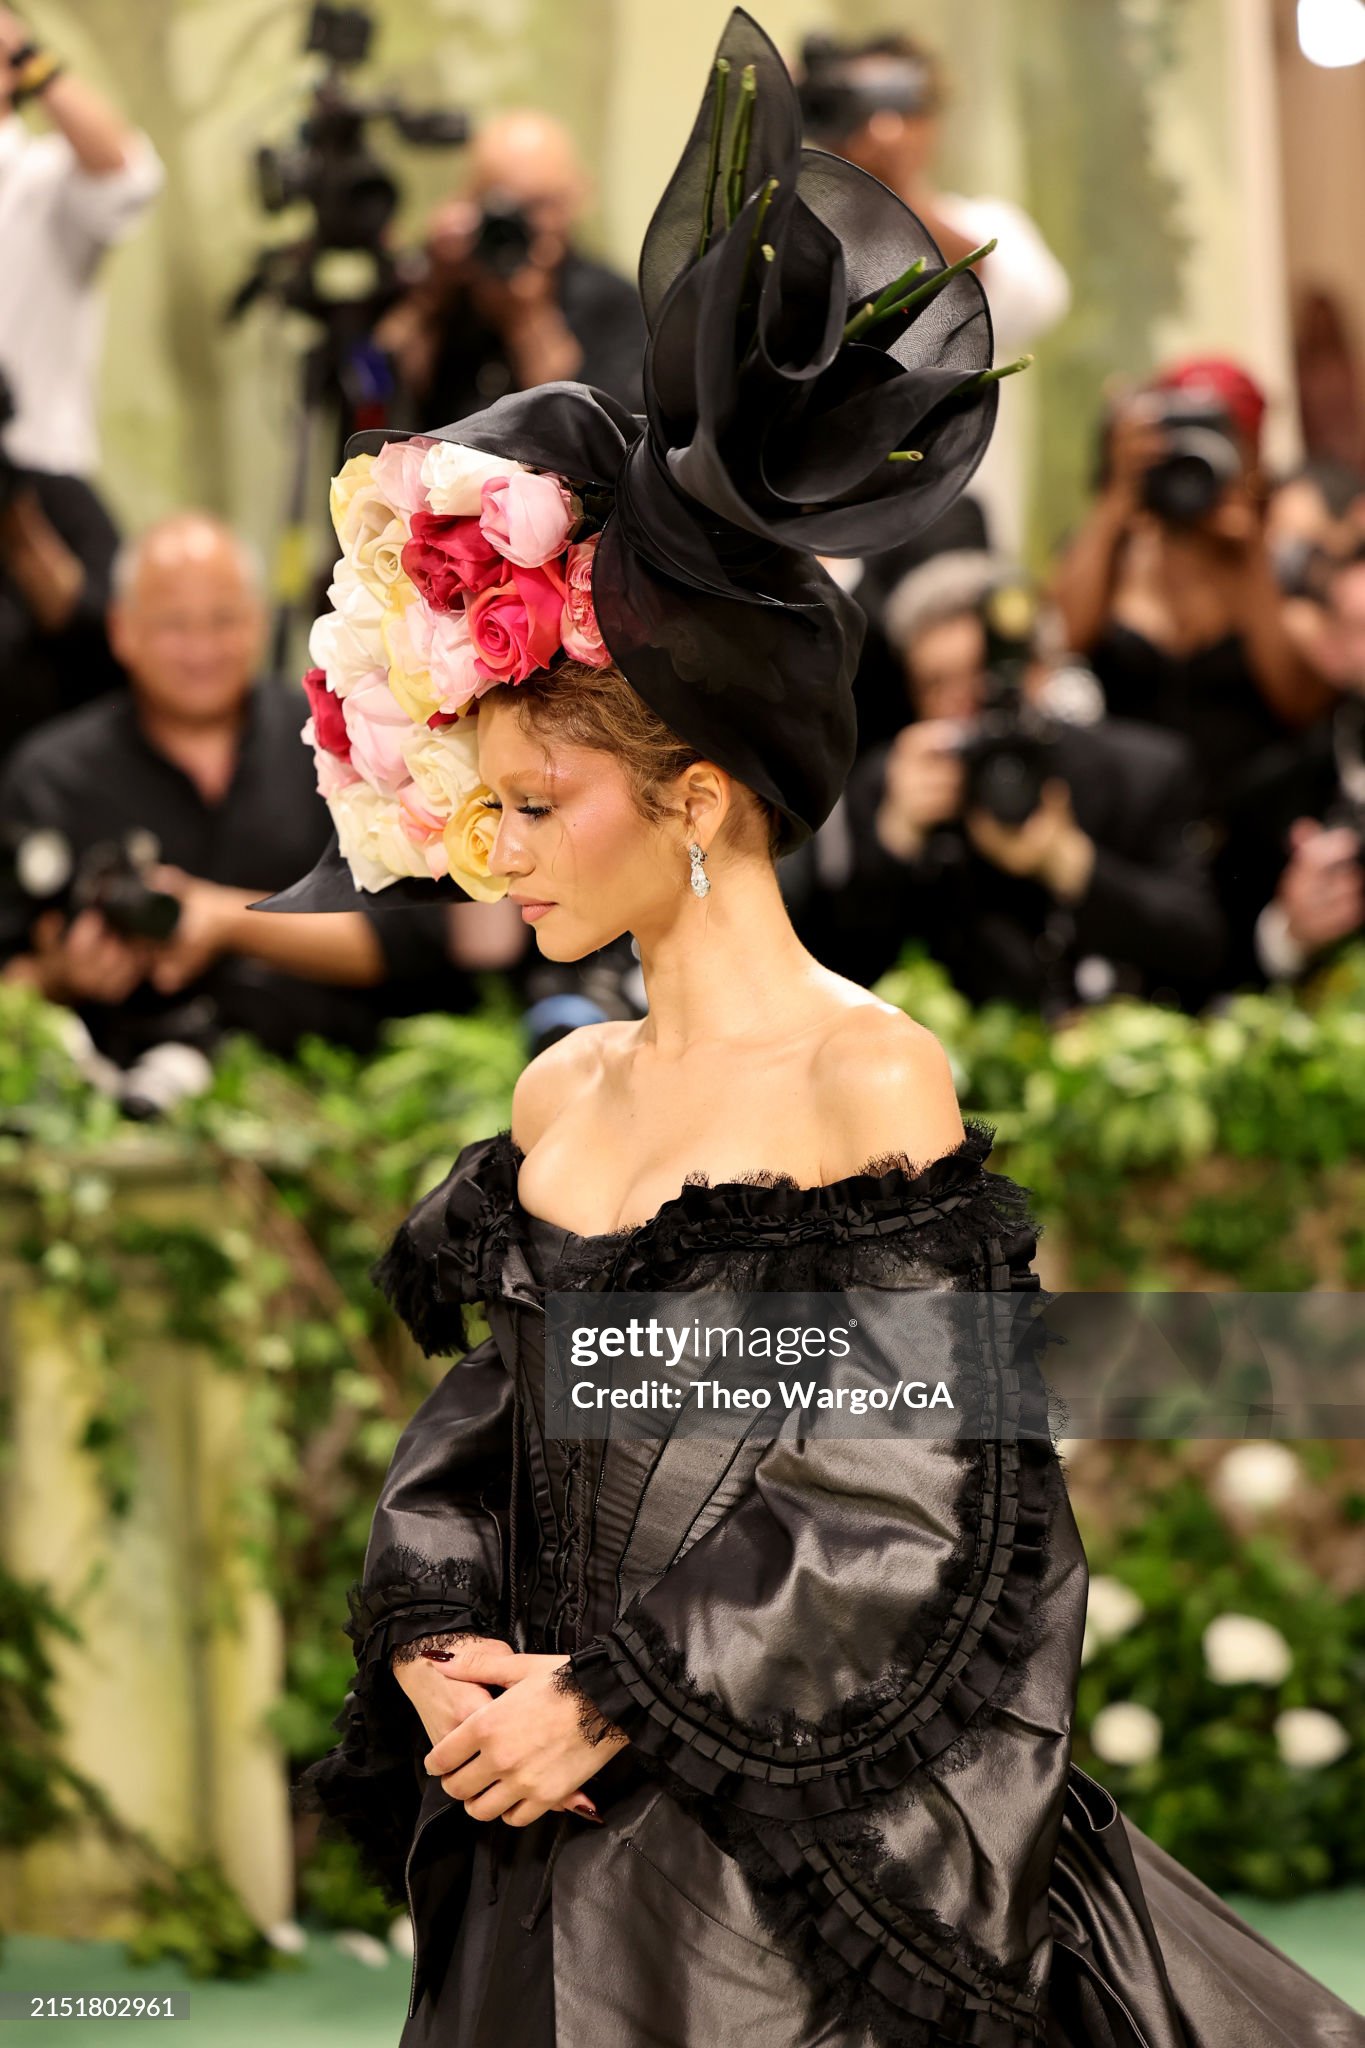 gettyimages-2151802961-2048x2048.jpg